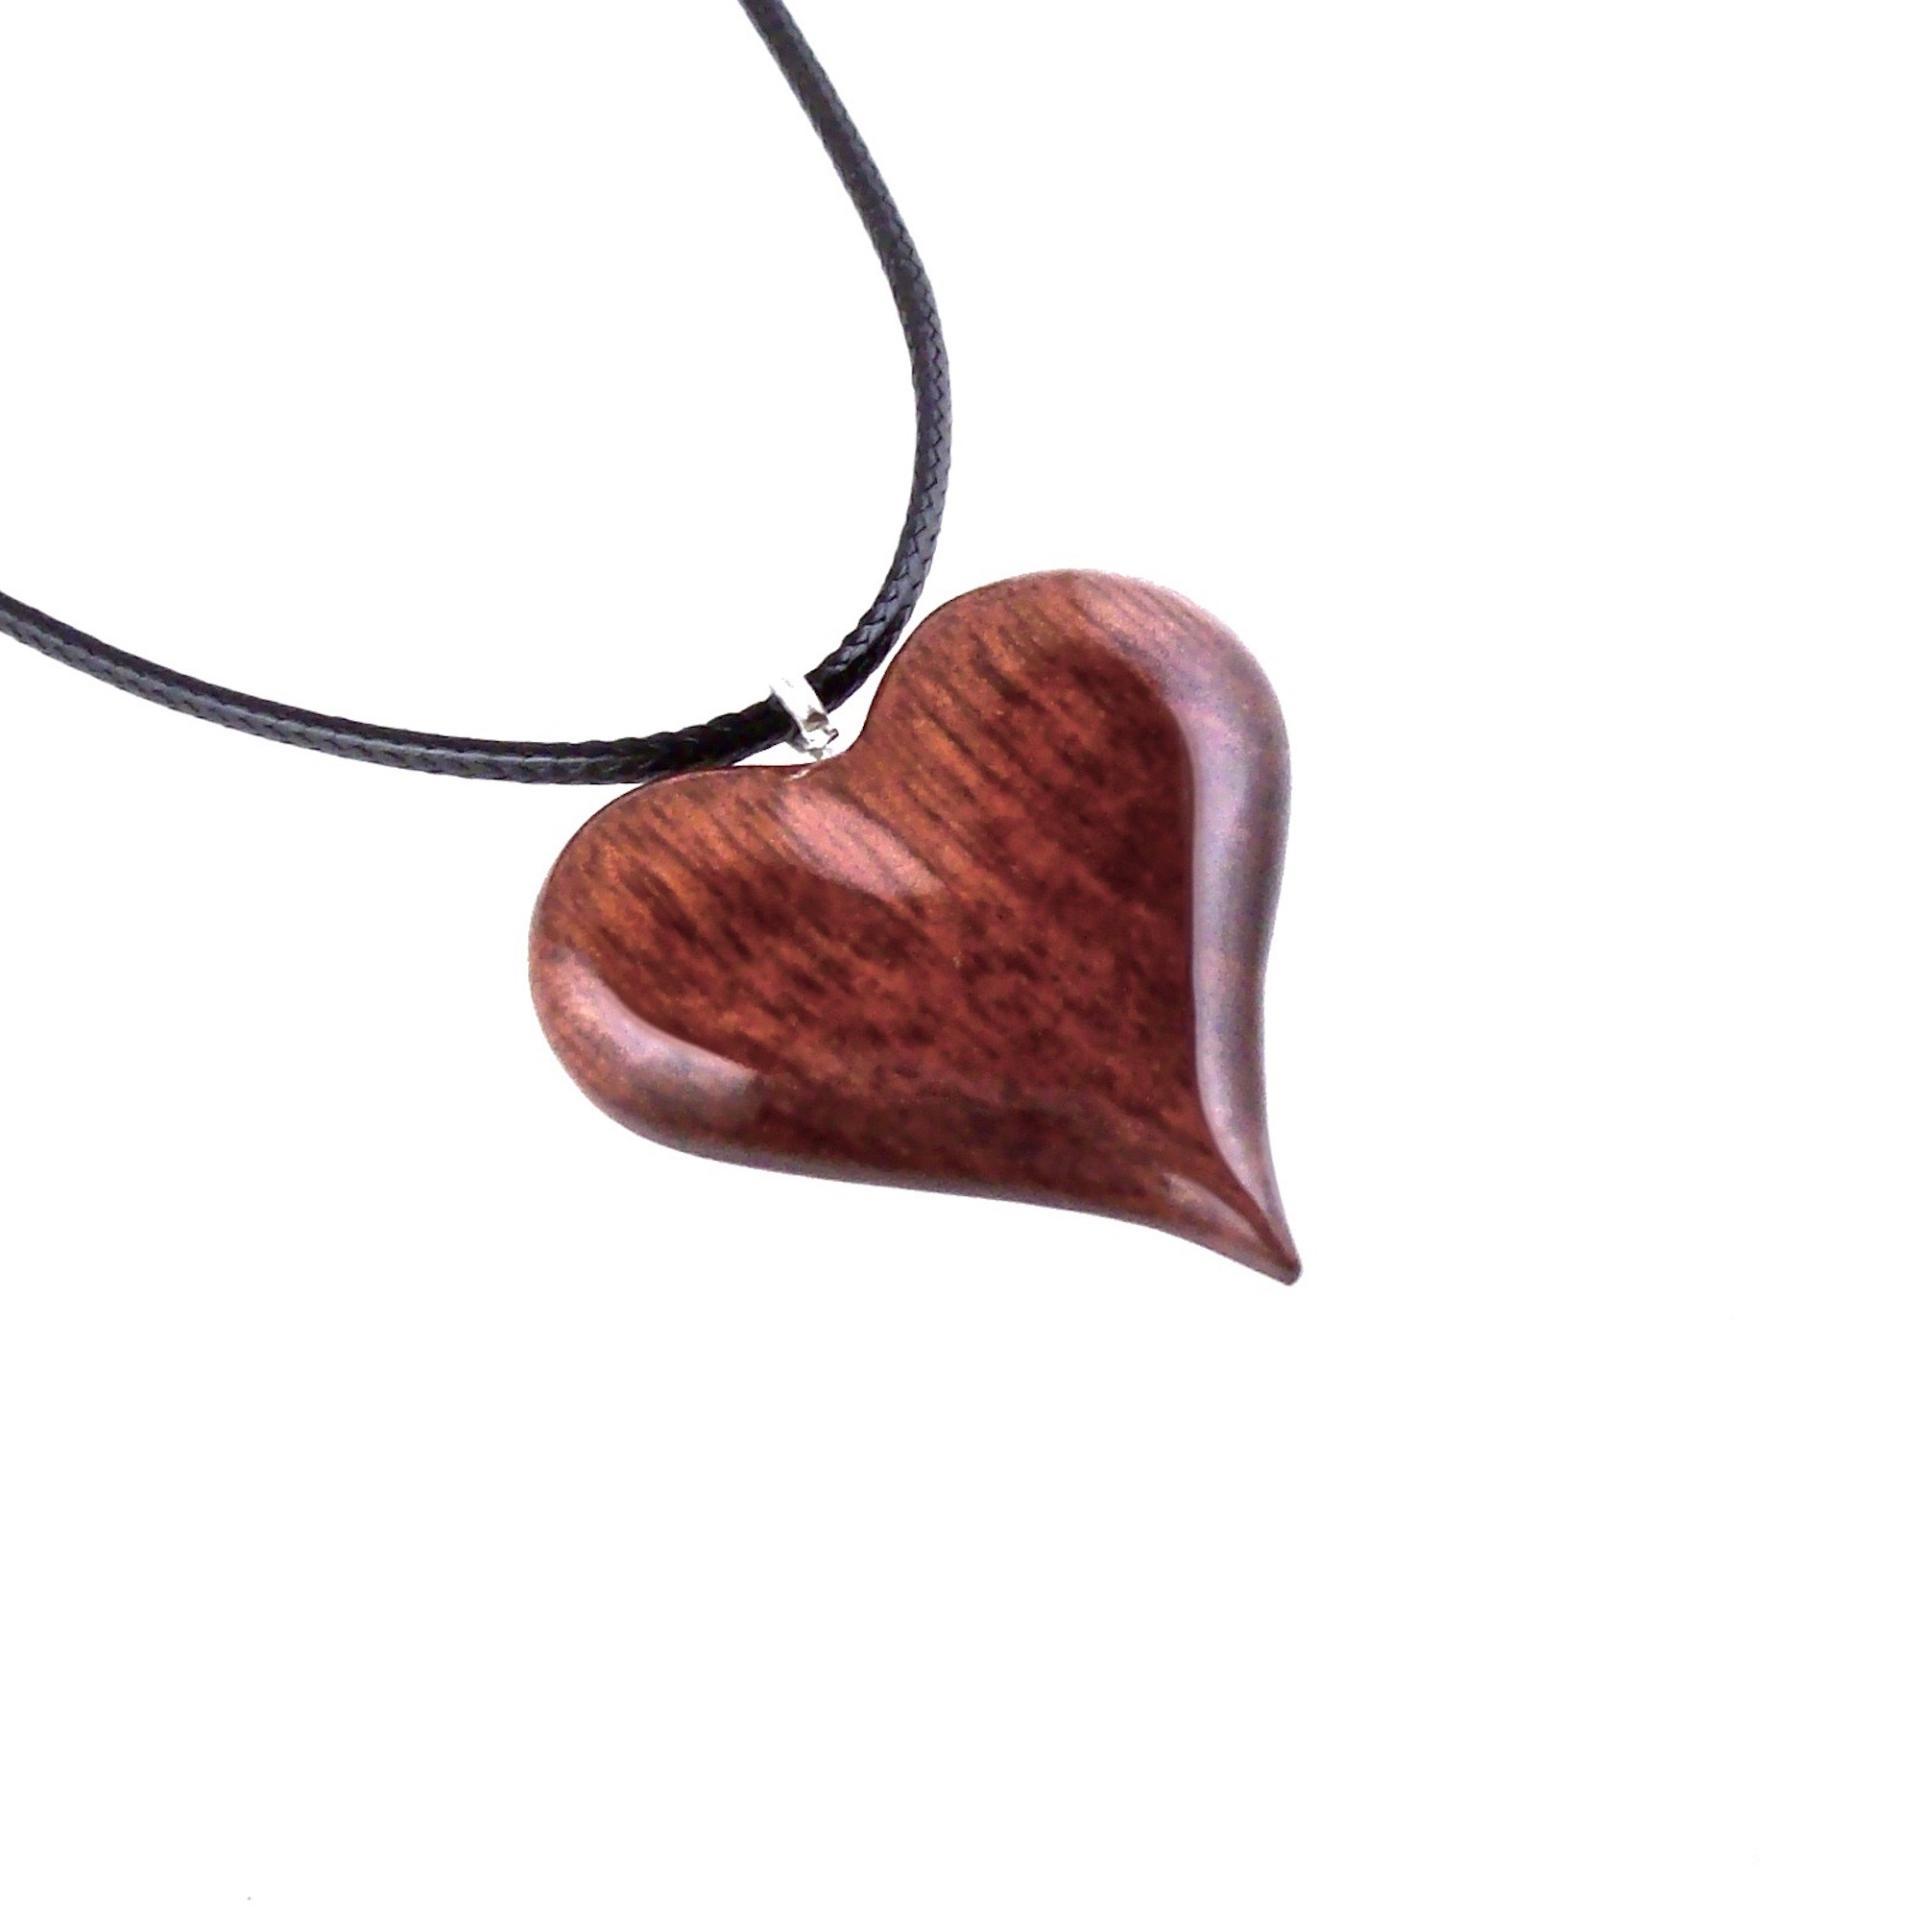 Wood Heart Necklace, Hand Carved Wooden Heart Pendant, One of a Kind 5th Anniversary Gift for Her, Handmade Jewelry